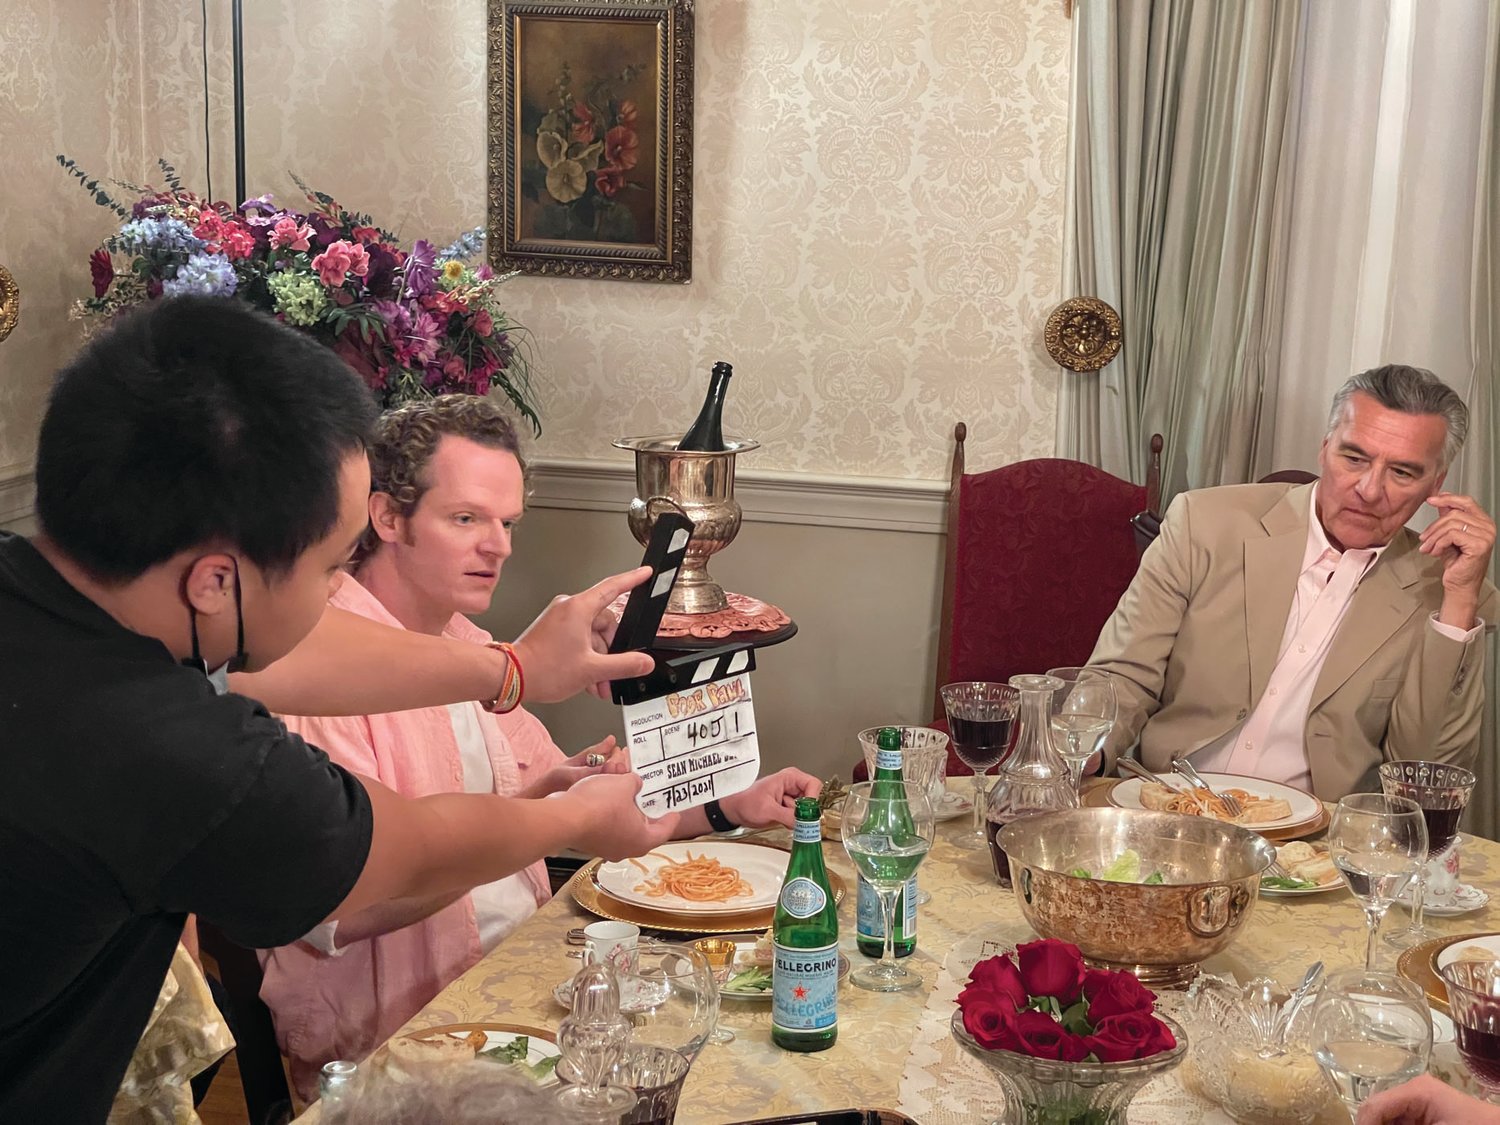 ACTION! Filming begins for a scene in the dining room at Sprague Mansion during Friday’s shoot for “Poor Paul.” Pictured are Nick Pasqual, left, and Stephen O’Neil Martin.